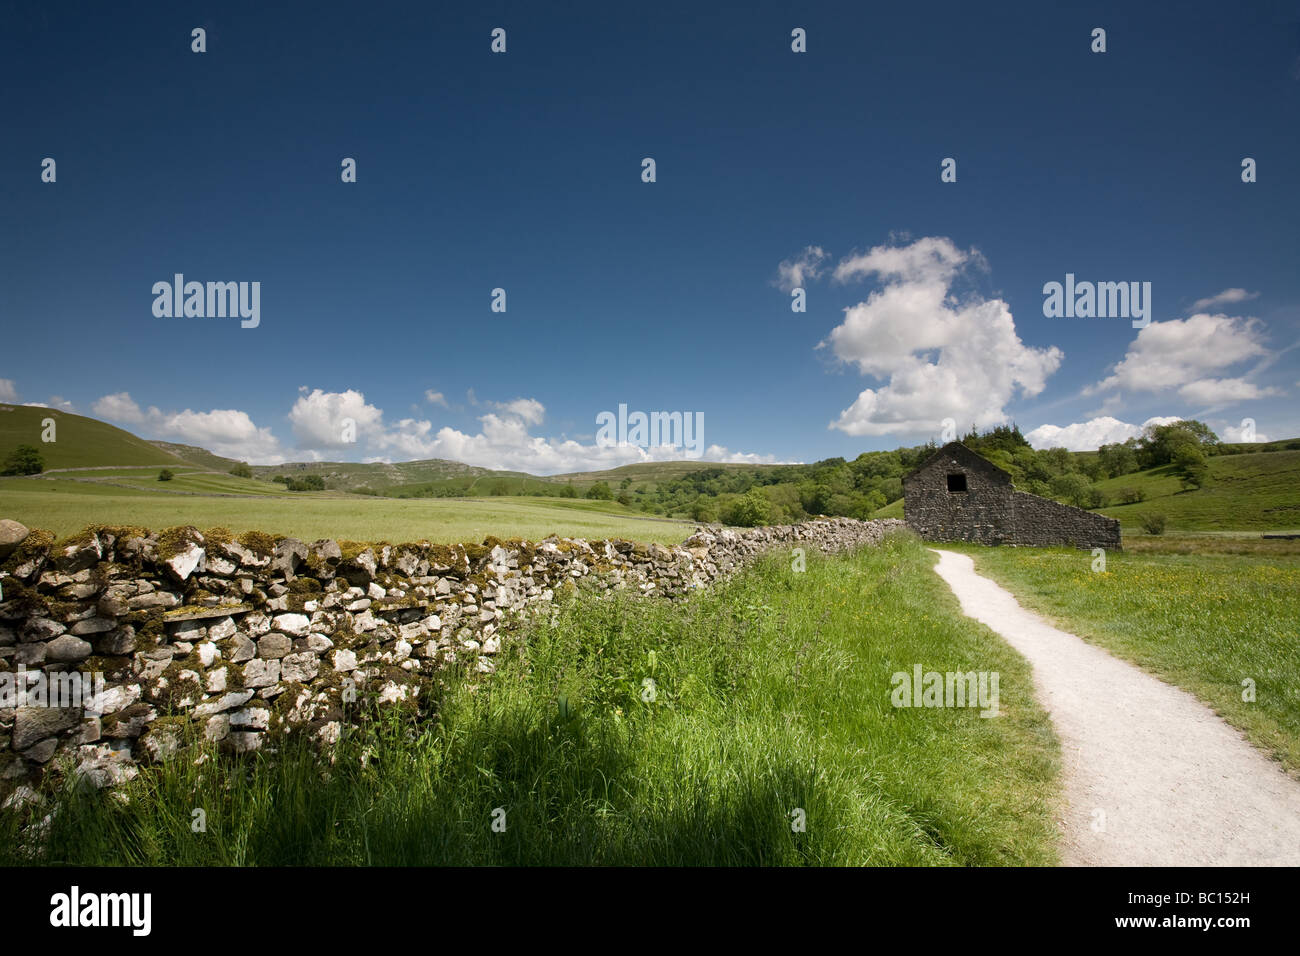 A Path leading to a barn near Malham Yorkshire Dales England Stock Photo